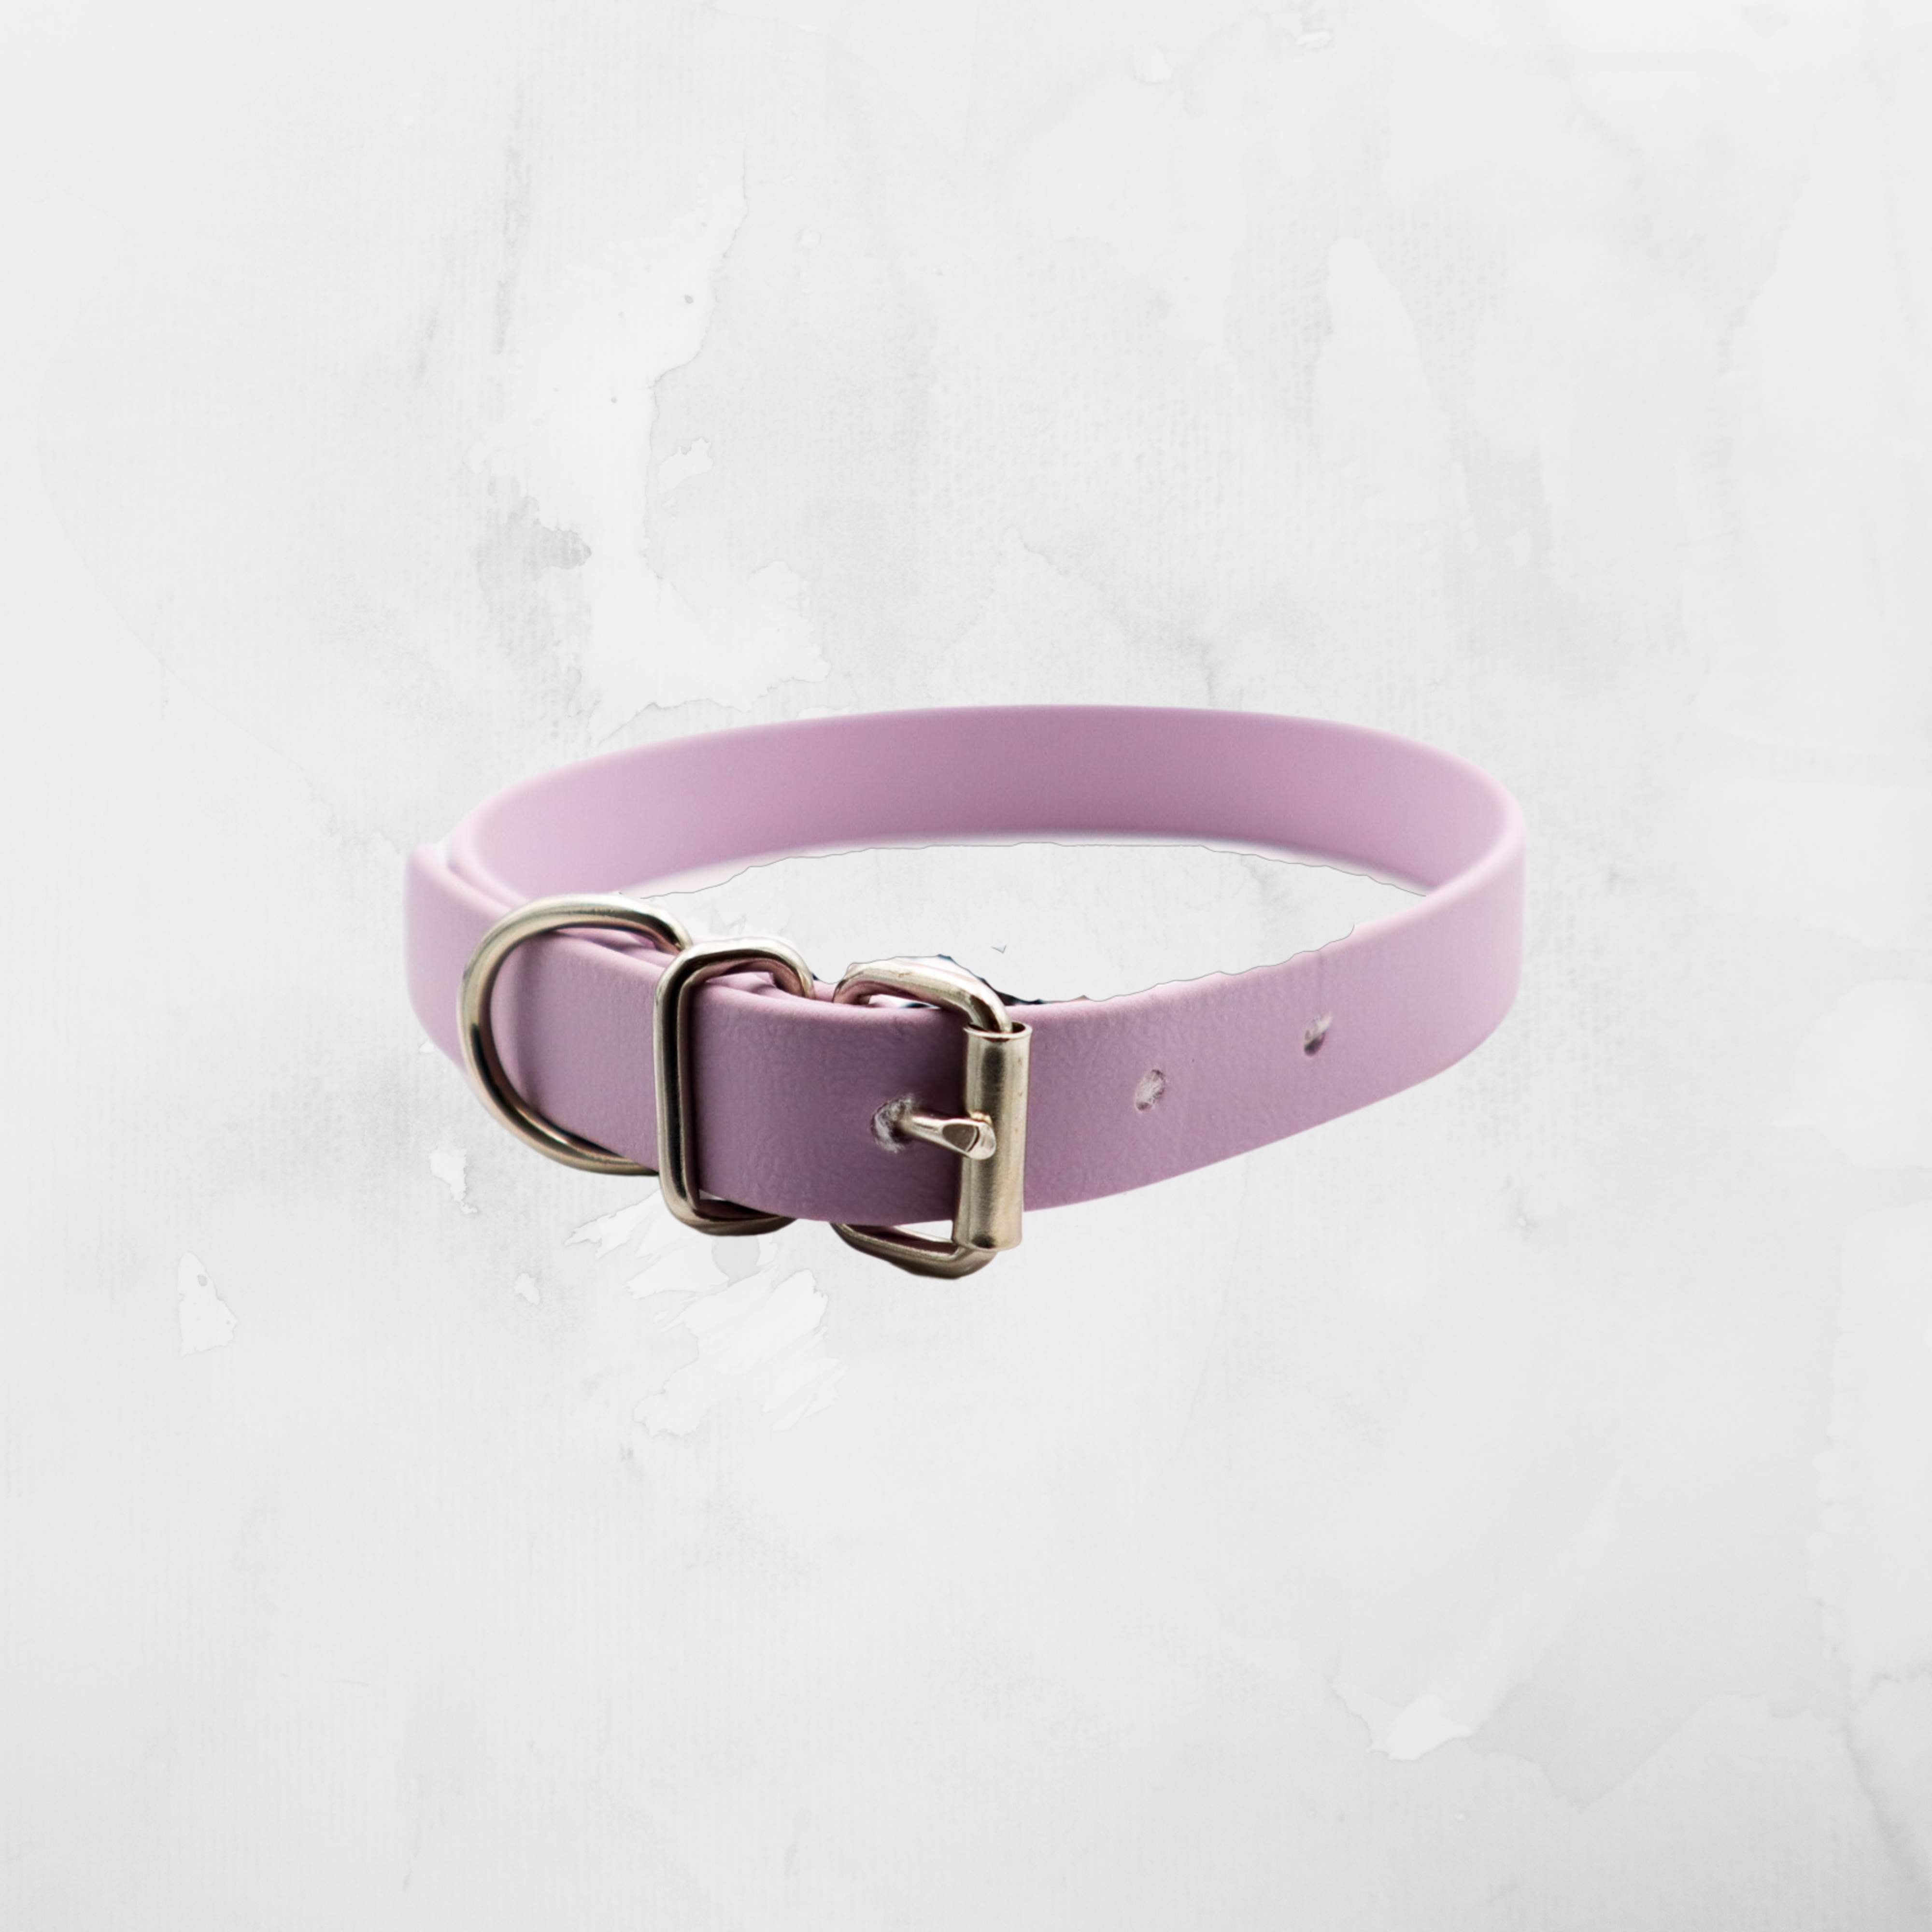 pastel purple biothane dog collar showcasing its silver double buckle detail, against a white textured background Distinguish me